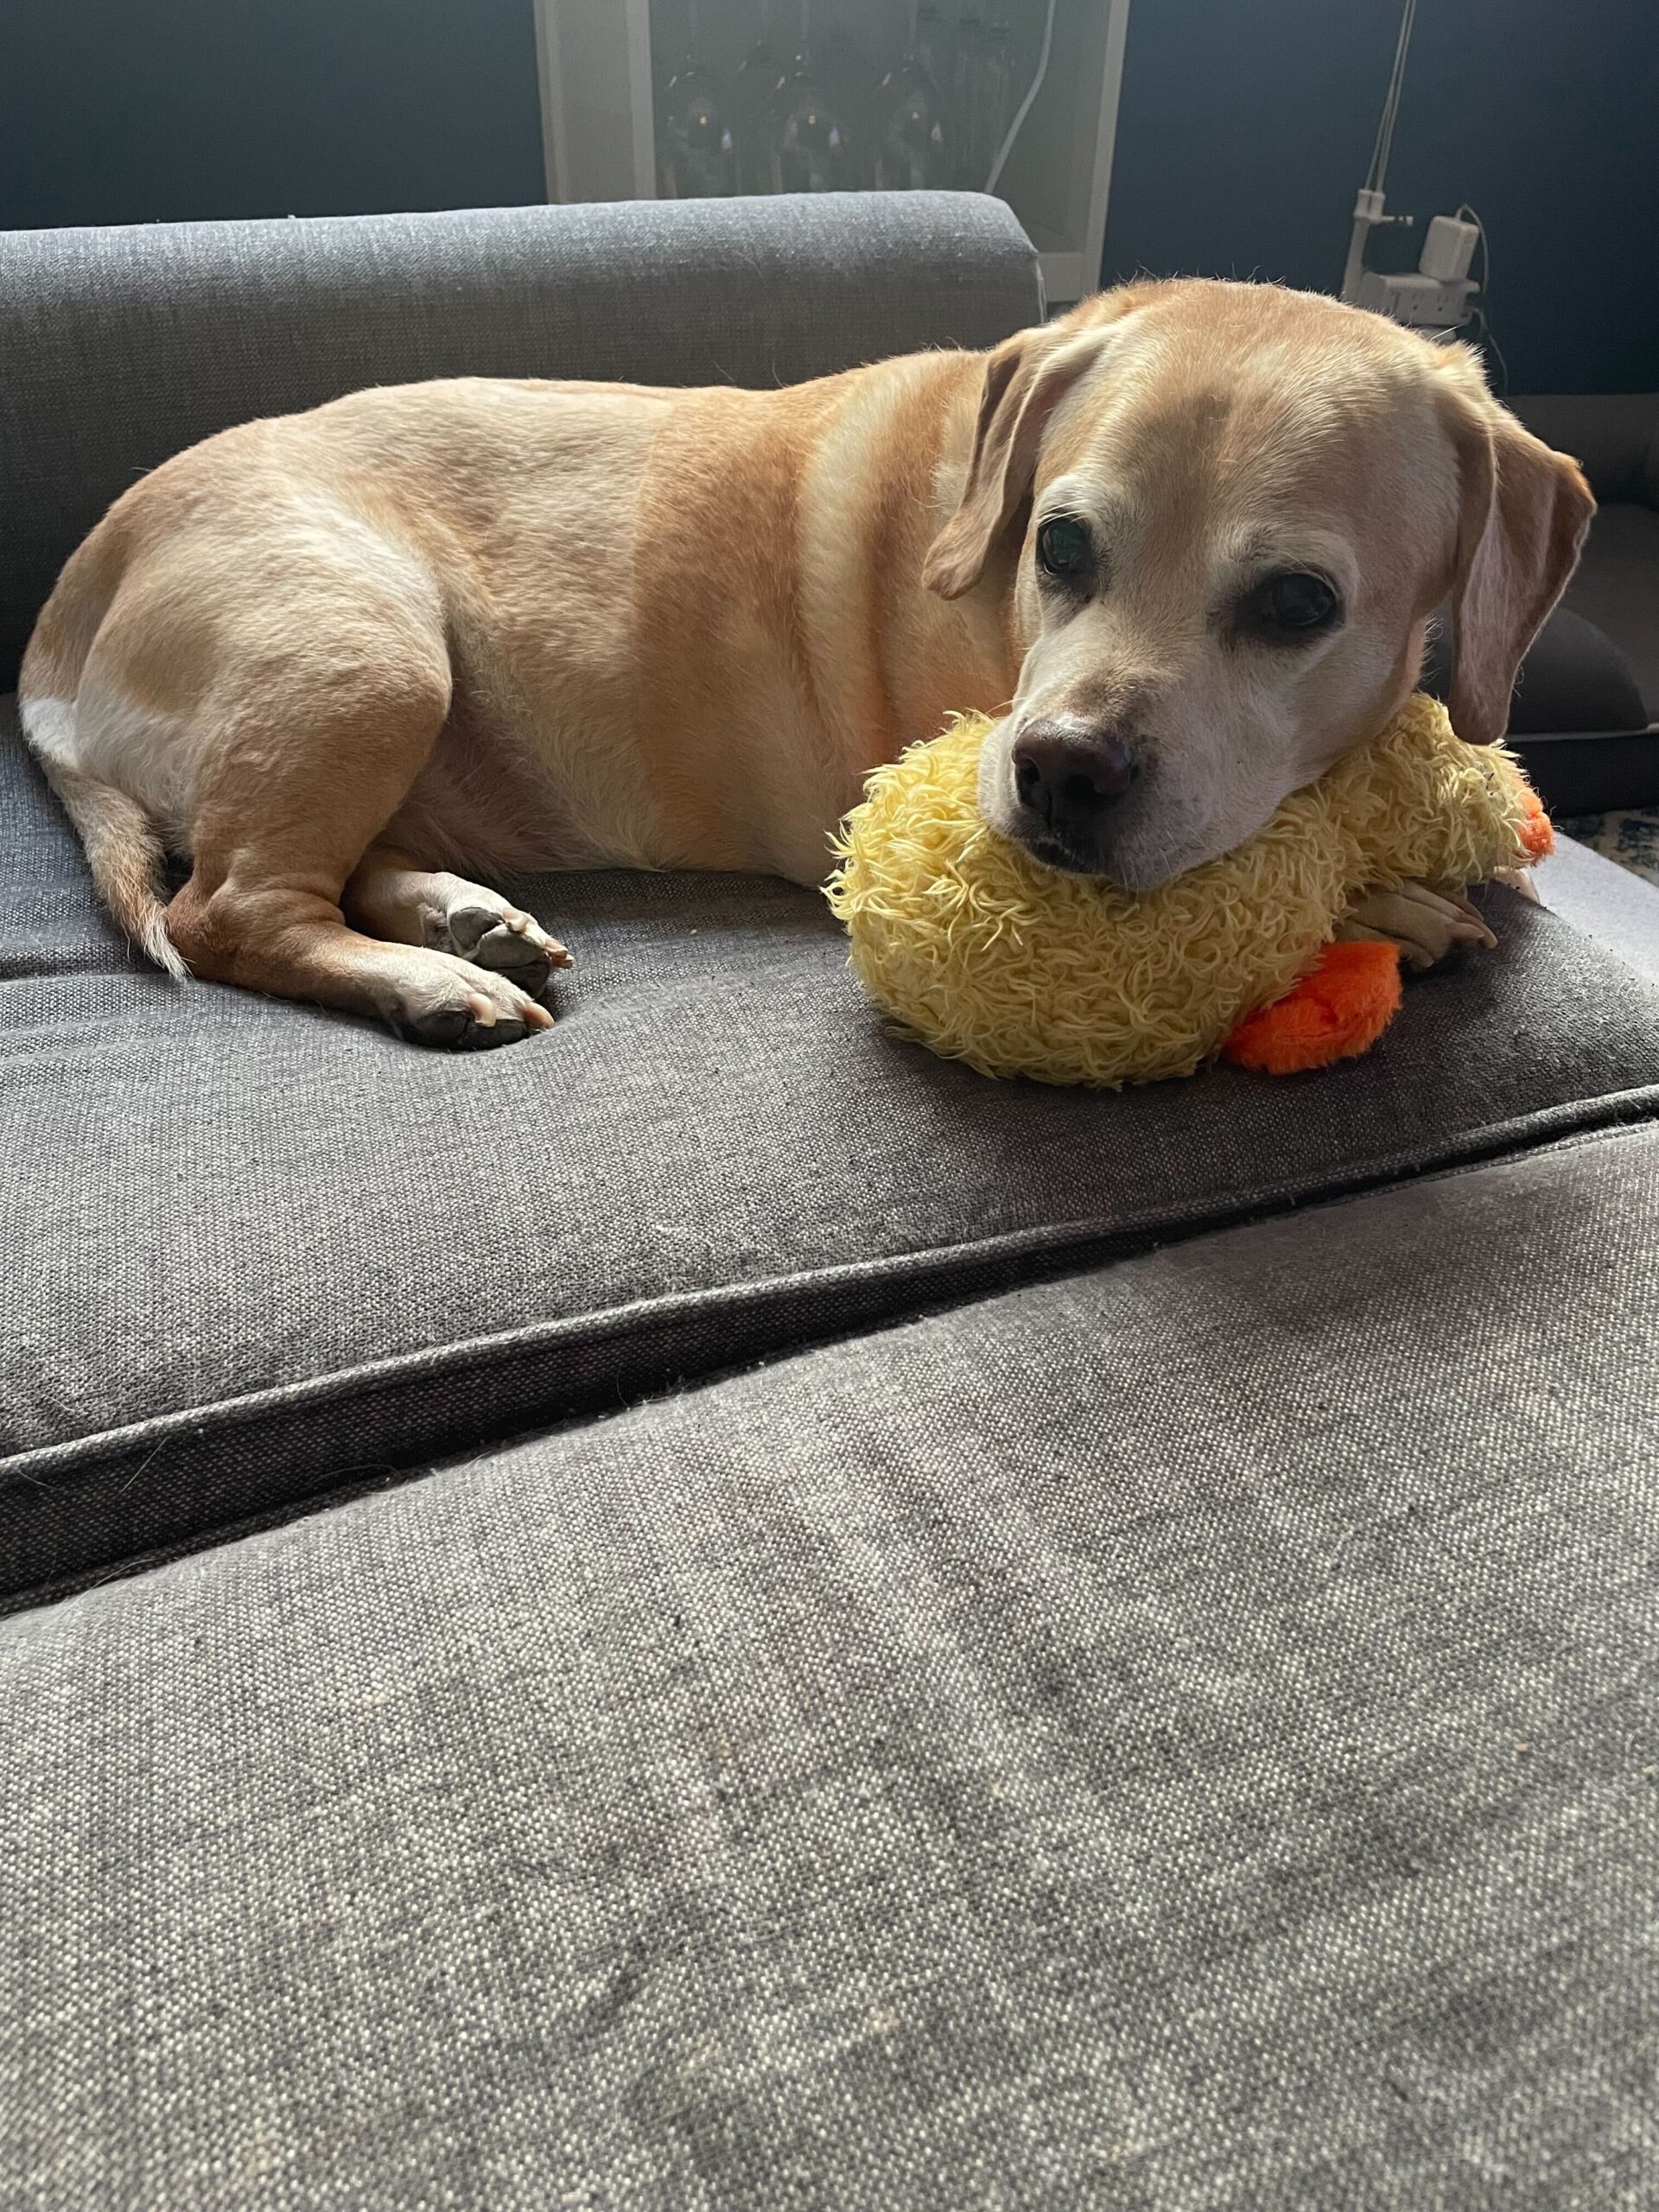 a photo of Waffles, a tan-colored dog with short legs, lying on the couch with a toy